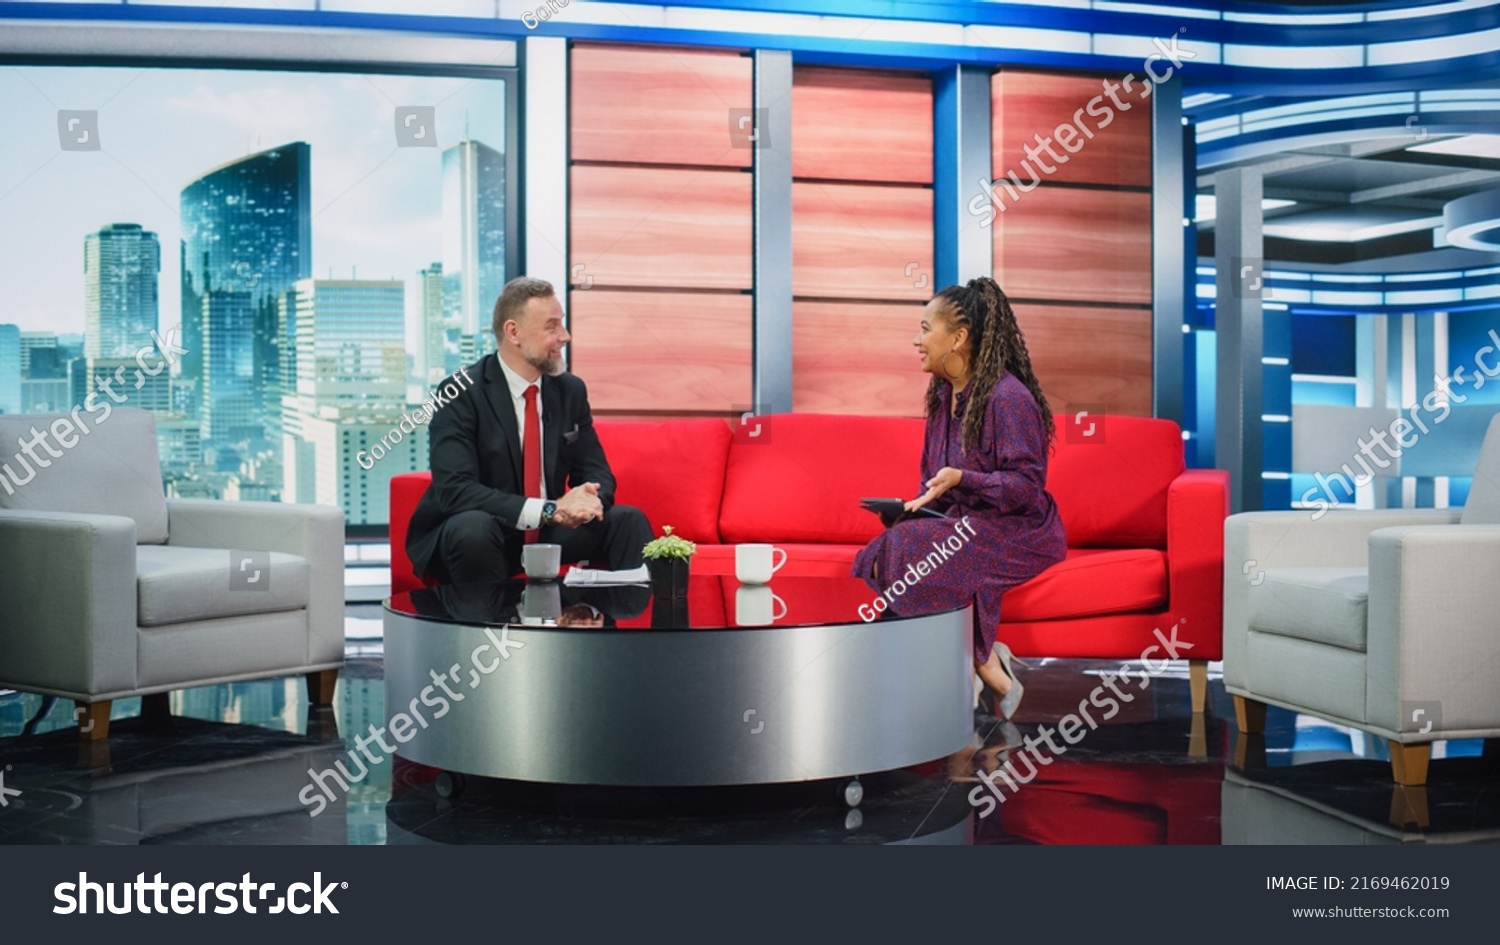 Talk Show TV Program Ending, News Interview, Discussion: Presenter and Guest Talk. Cable Channel Hosts Saying Goodbye to the Audience. Mock-up Television Studio, Newsroom Entertainment Concept #2169462019